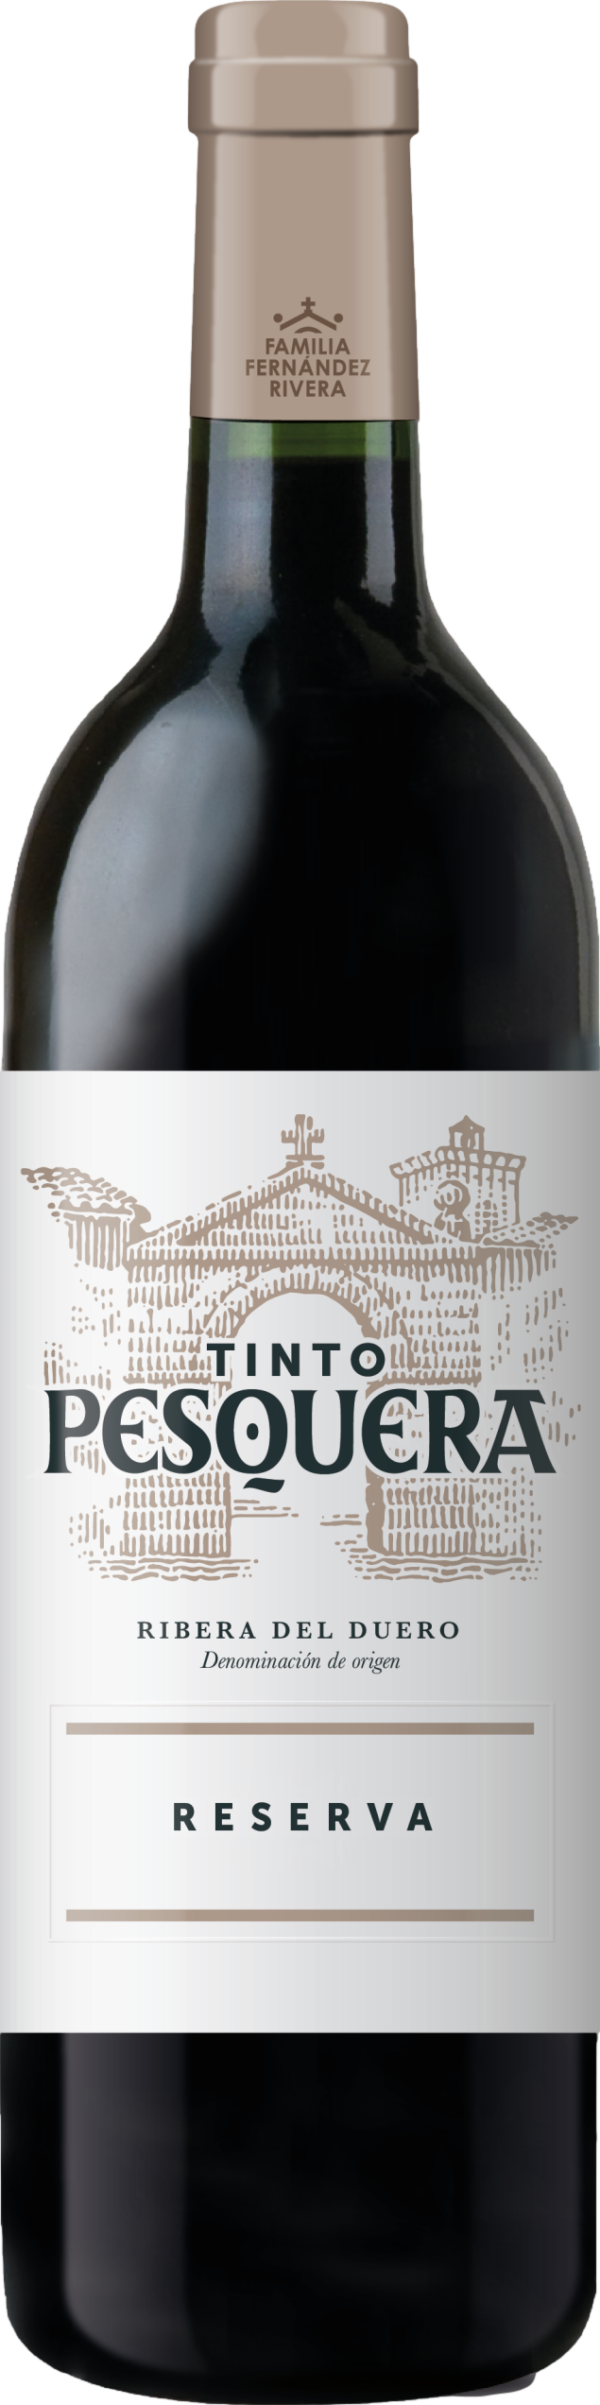 Product image of Tinto Pesquera Reserva 2019 from 8wines